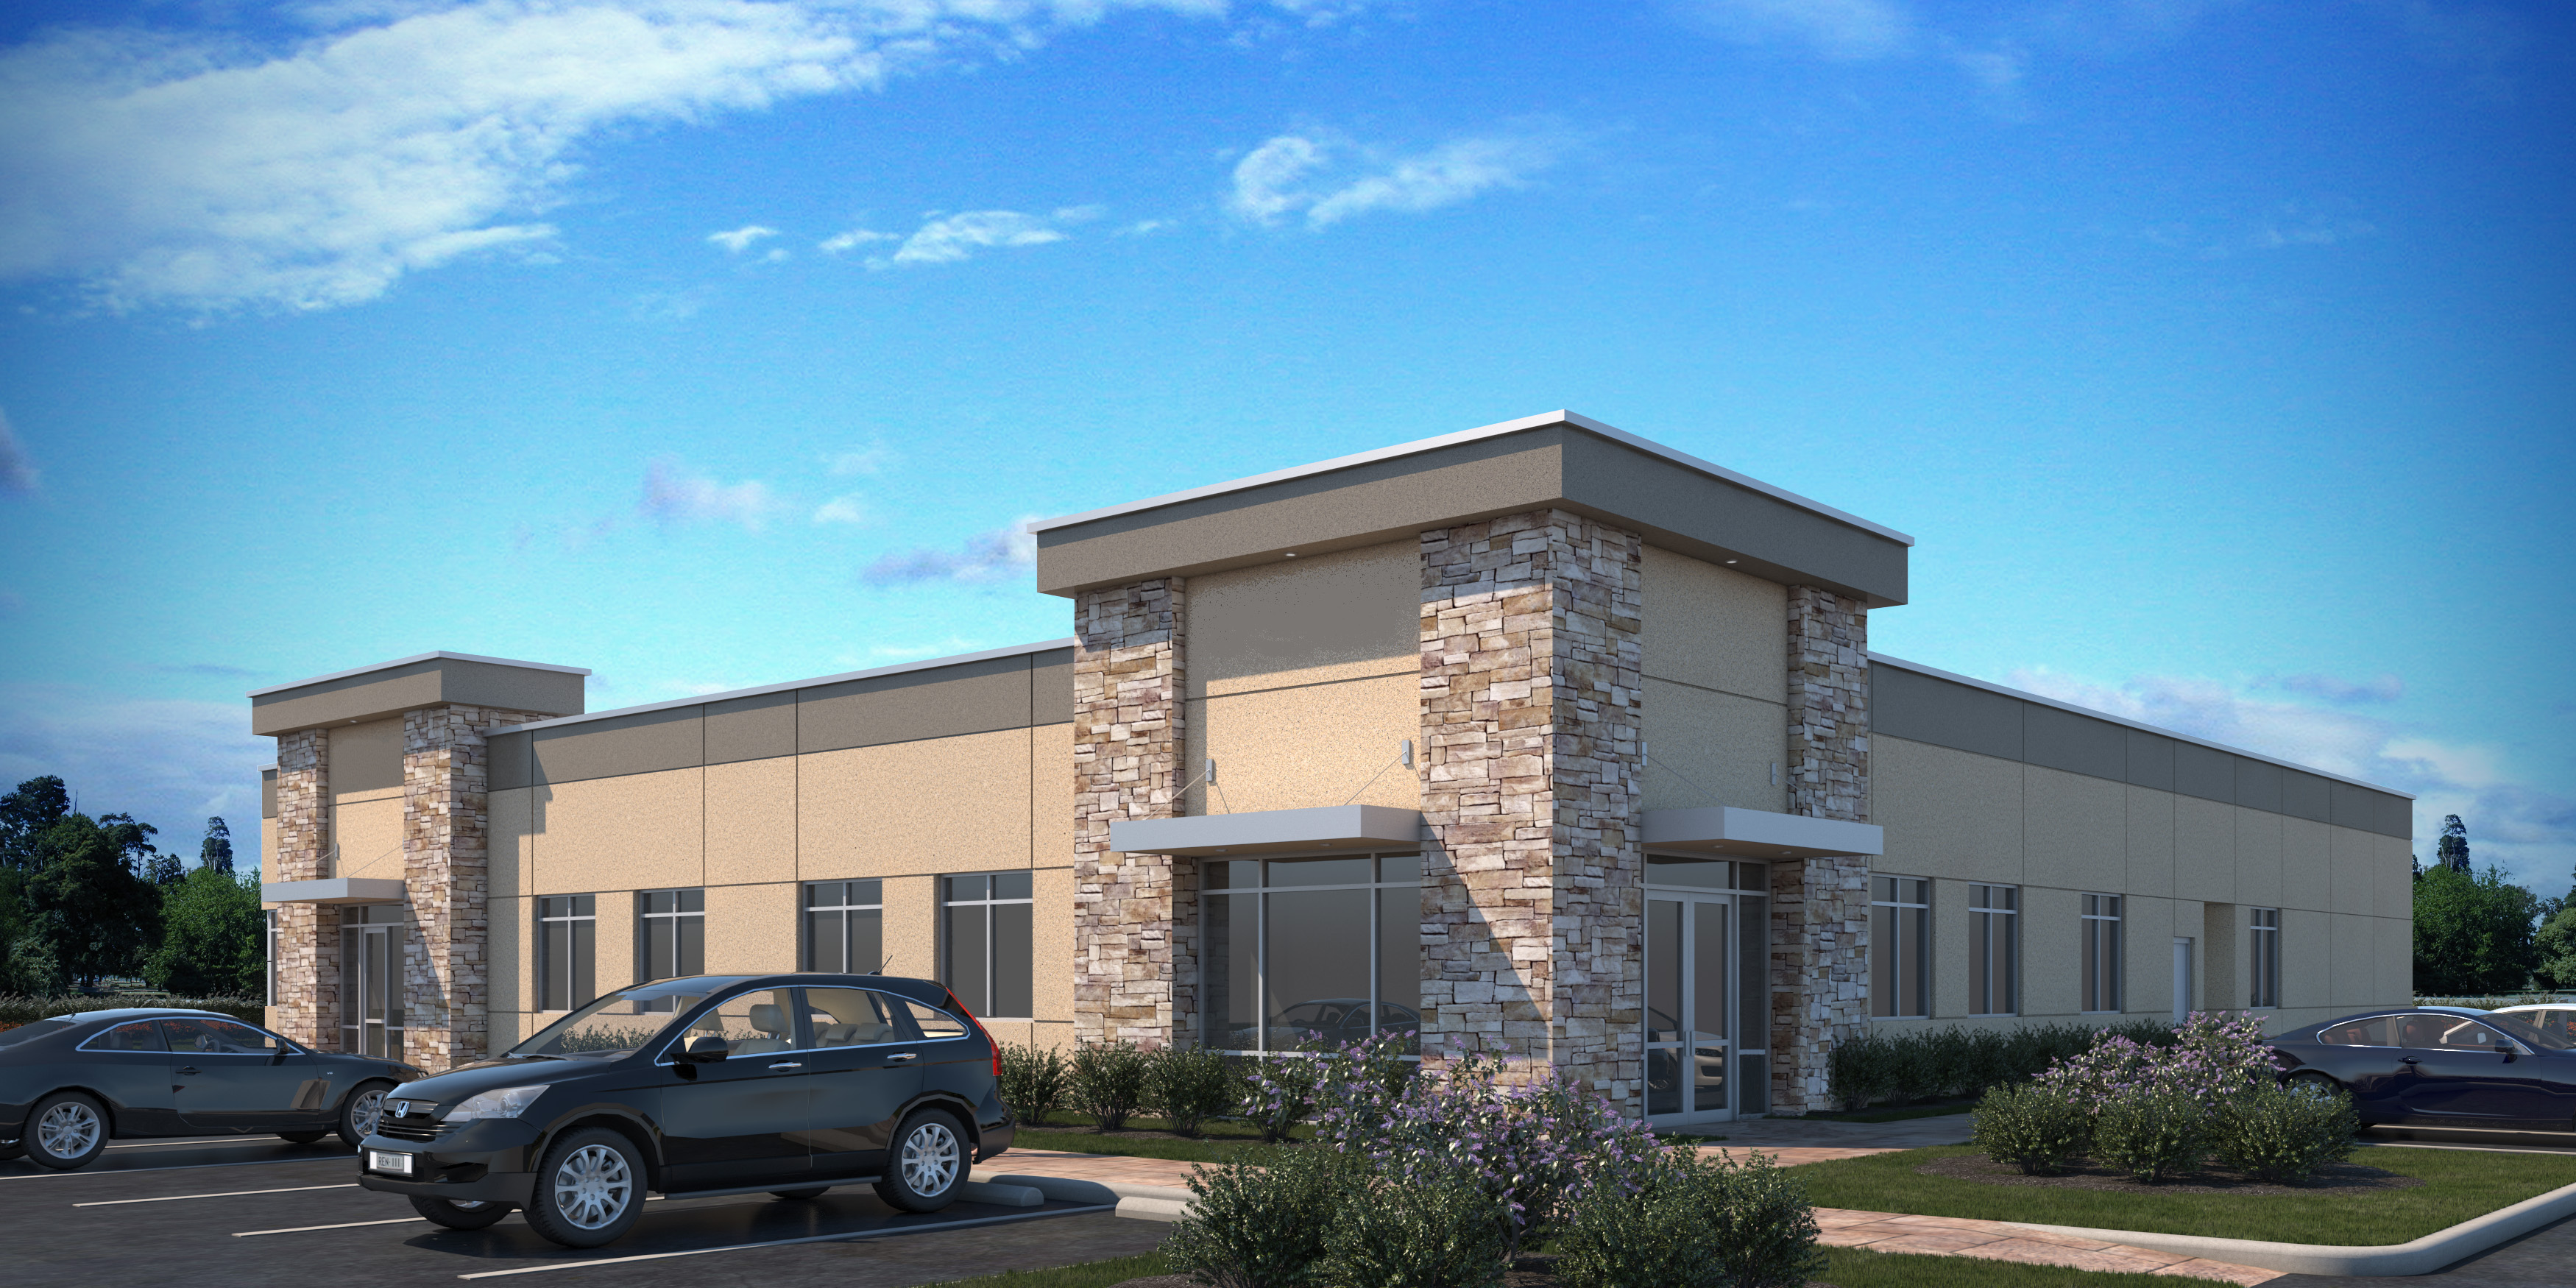 Rendering of new Capital Hospital Outpatient Diagnostic Imaging Center